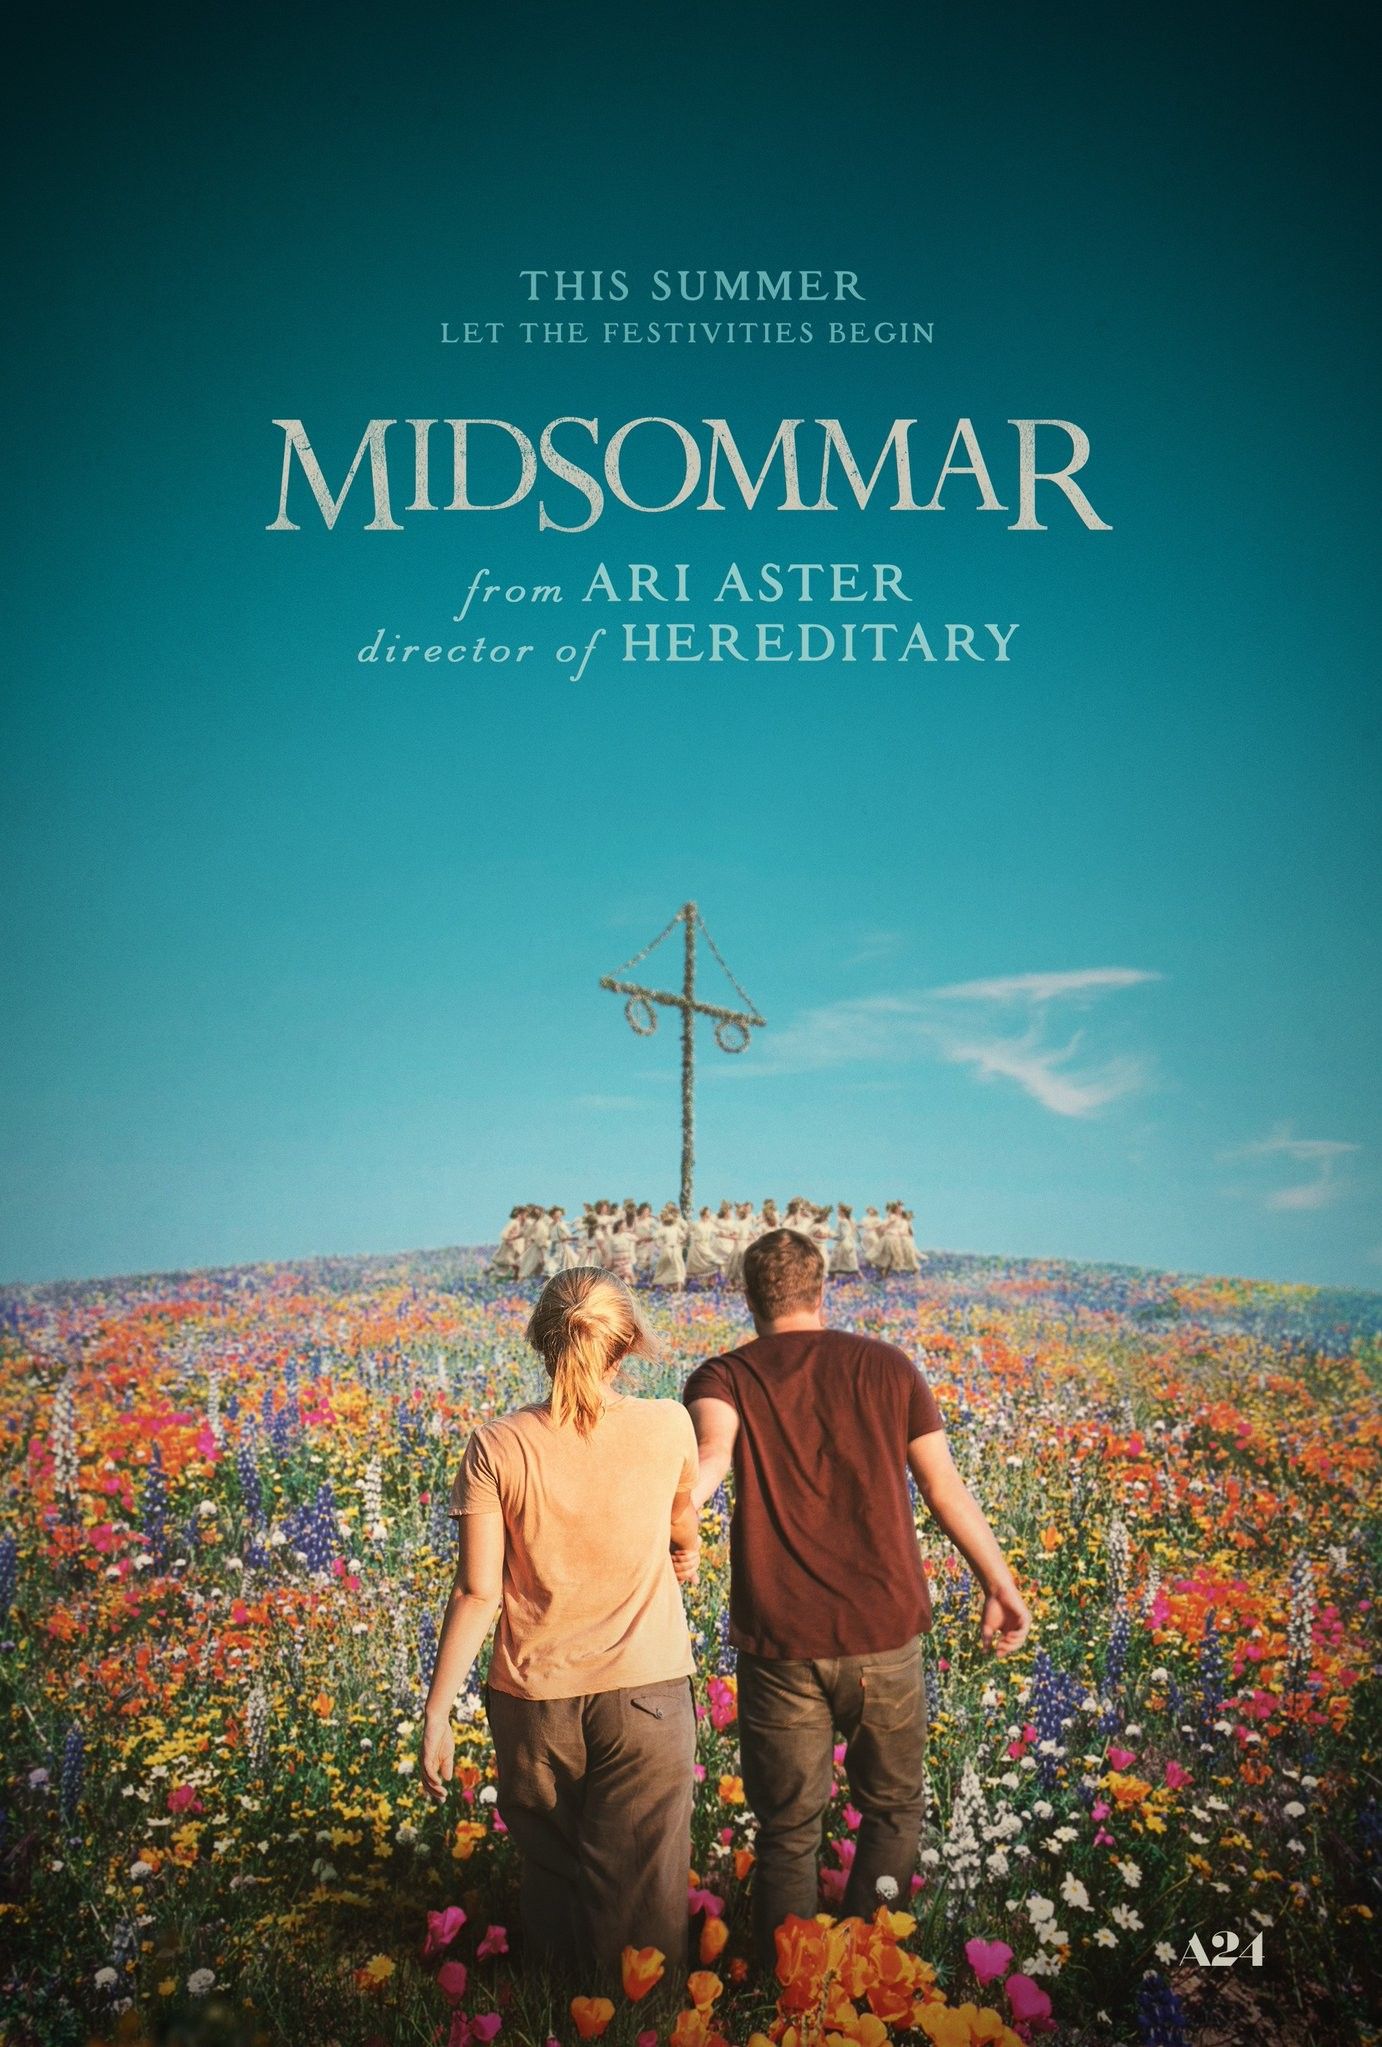 Midsommar Poster Teases Ari Aster's Followup to Hereditary – iNerd